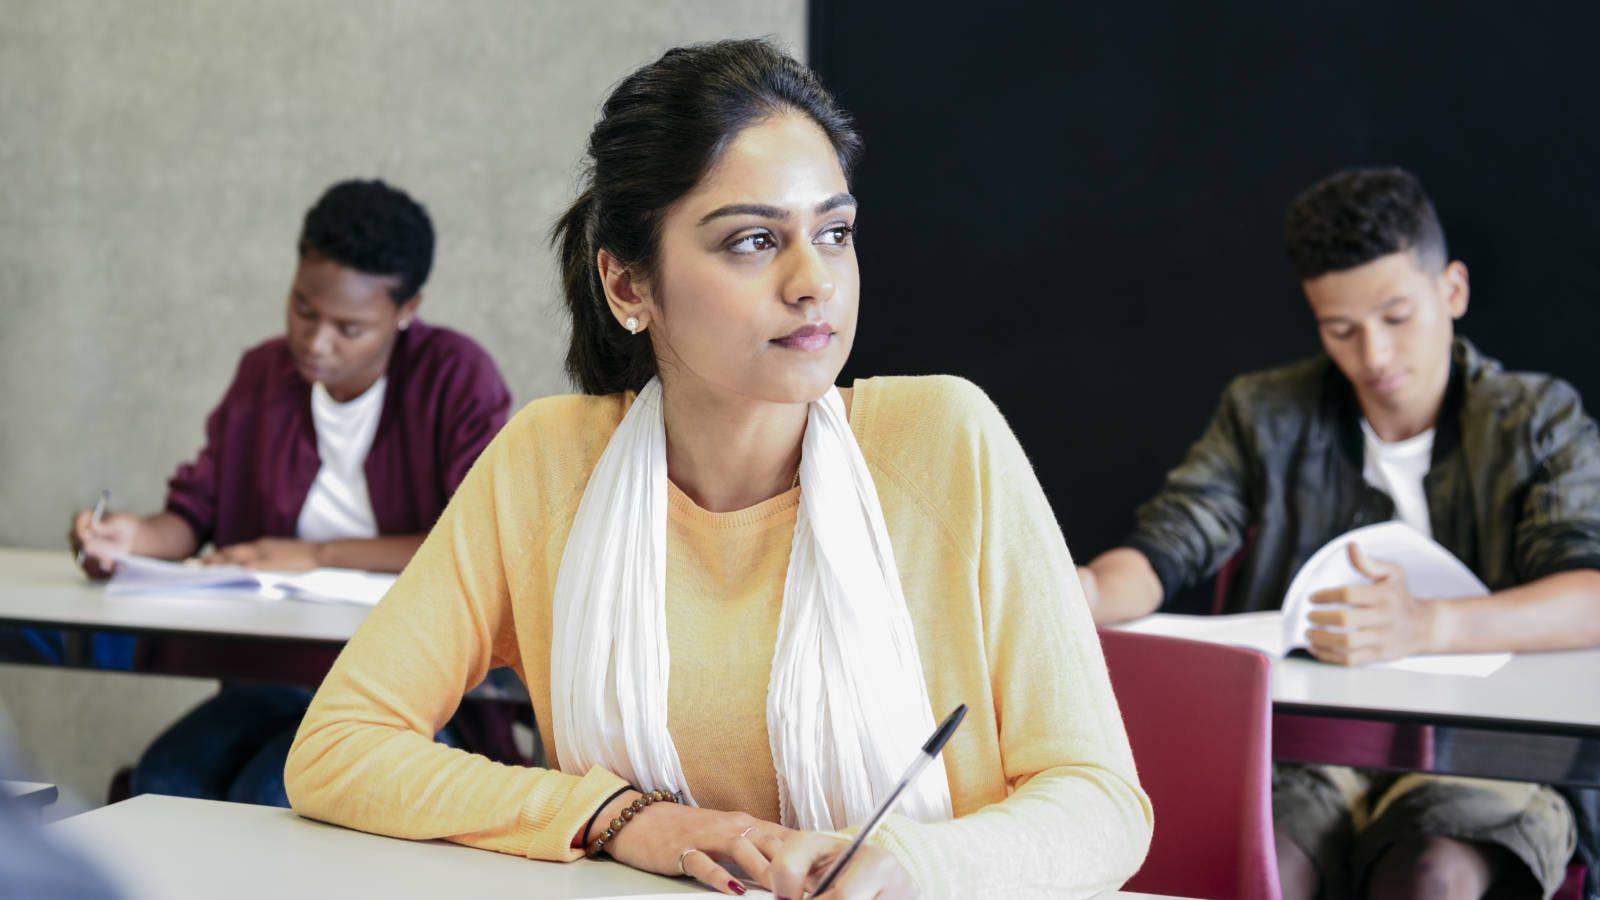 Young woman in yellow sweater doing exam, looking away